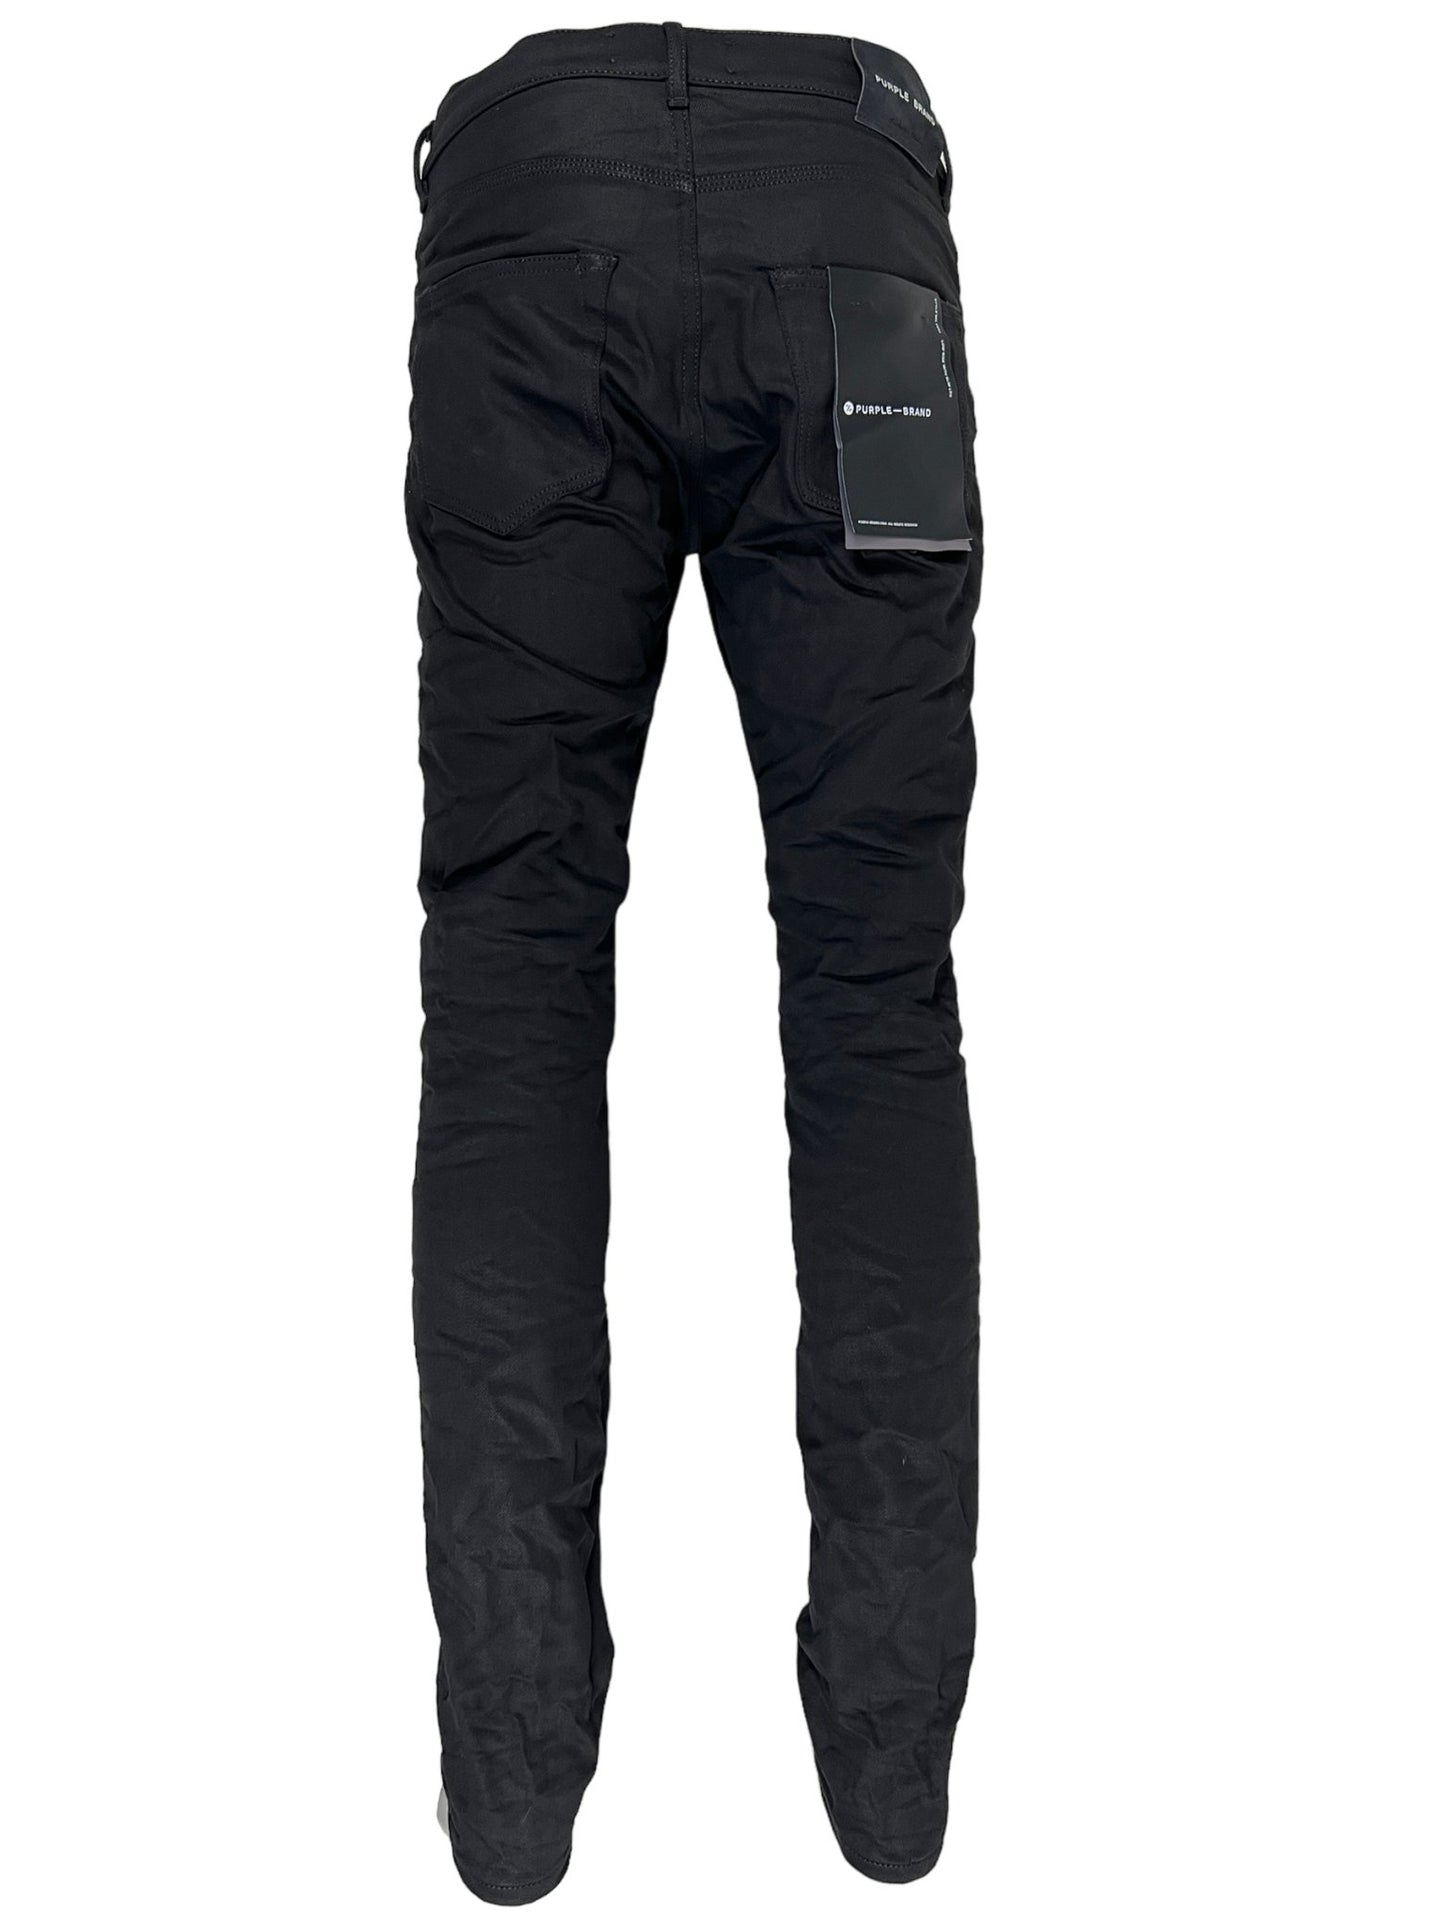 A pair of PURPLE BRAND stretch denim jeans with a pocket on the back, offering enhanced comfort.